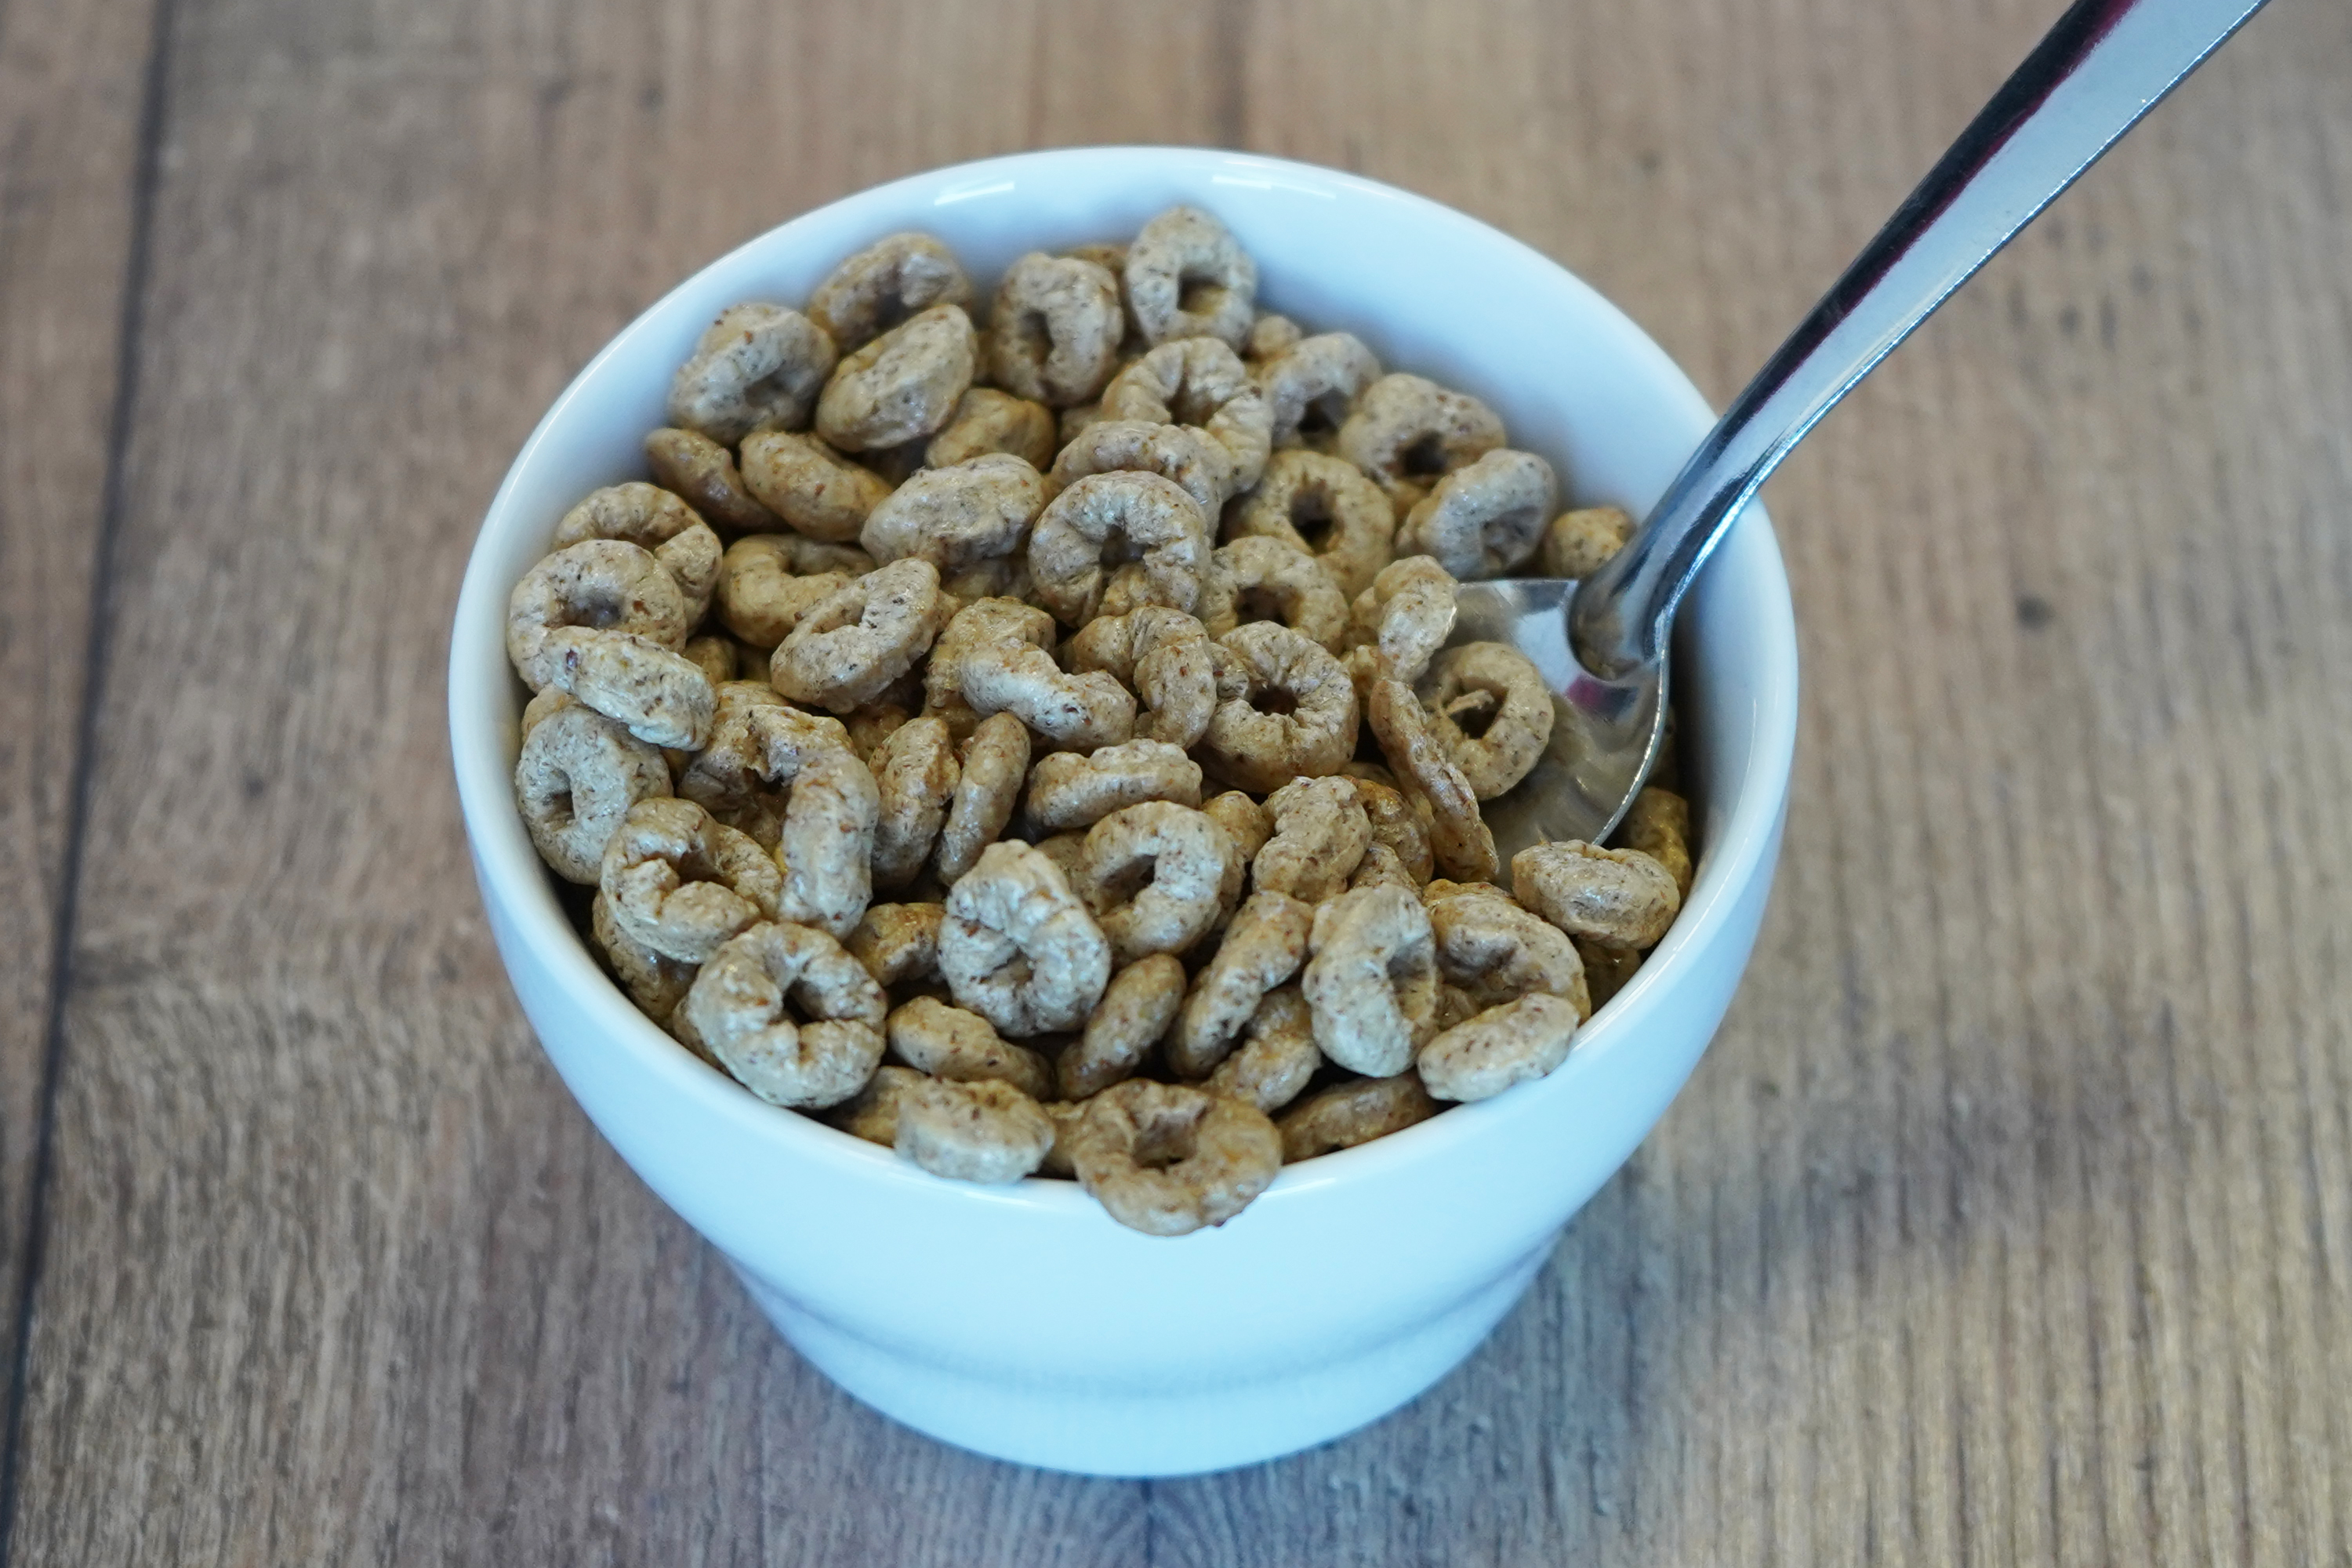 Laboratoire PYC introduces protein cereal